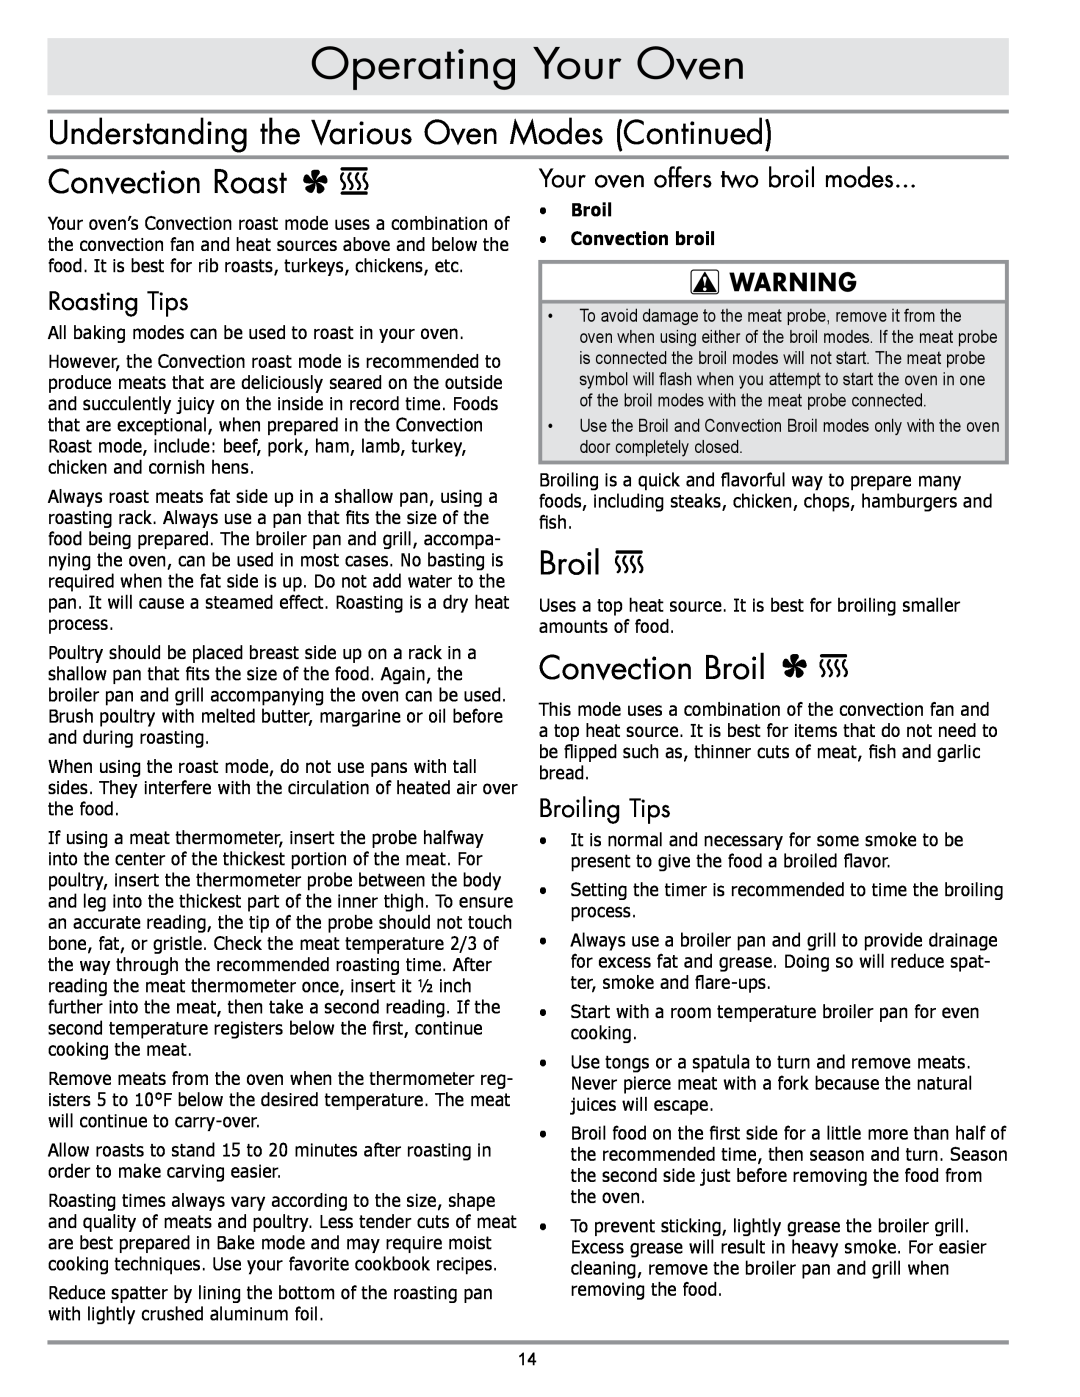 Sears EORD230 manual Understanding the Various Oven Modes Continued, Convection Roast, Convection Broil, Roasting Tips 